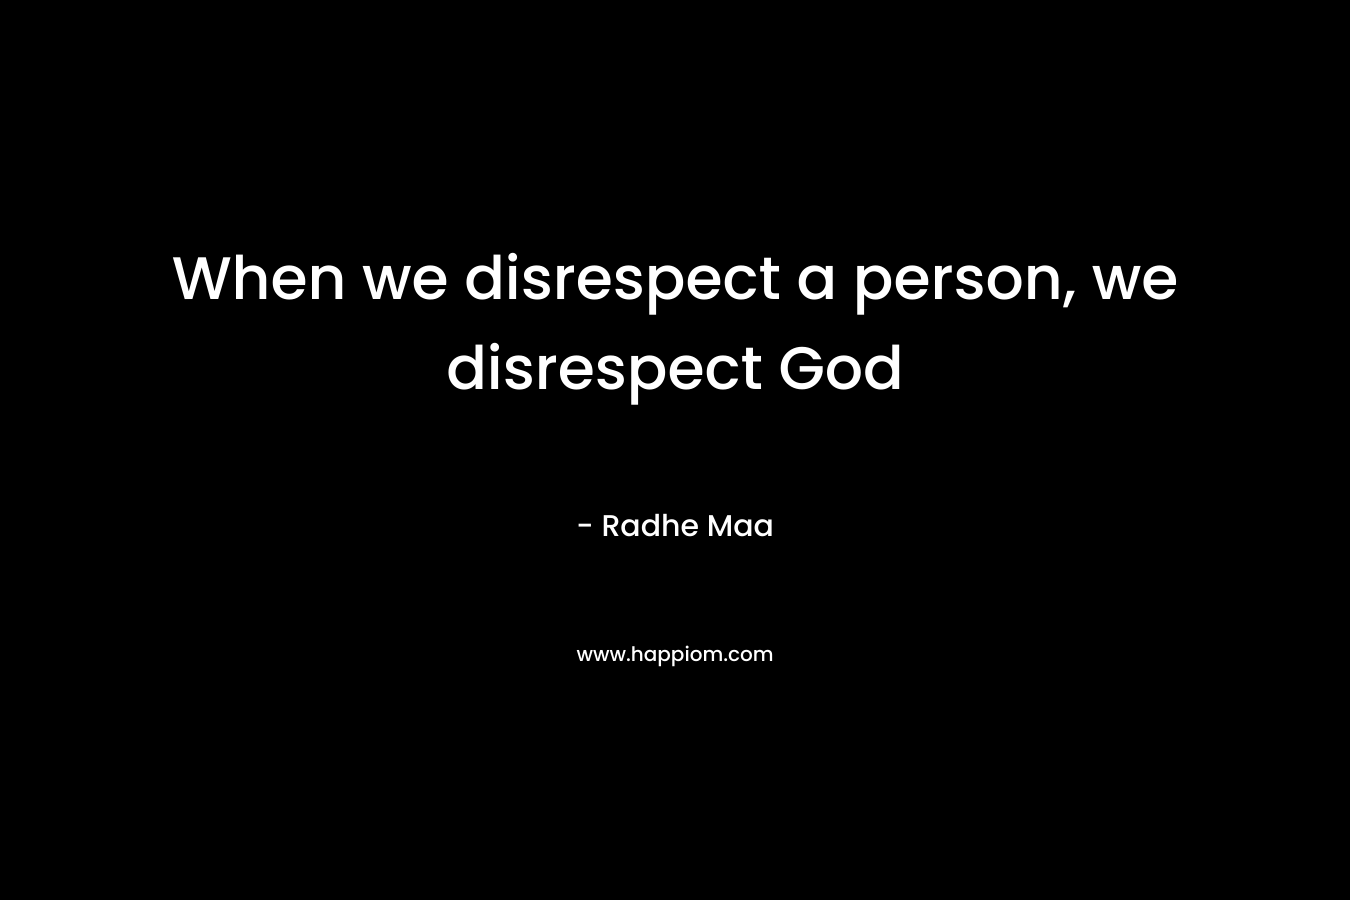 When we disrespect a person, we disrespect God